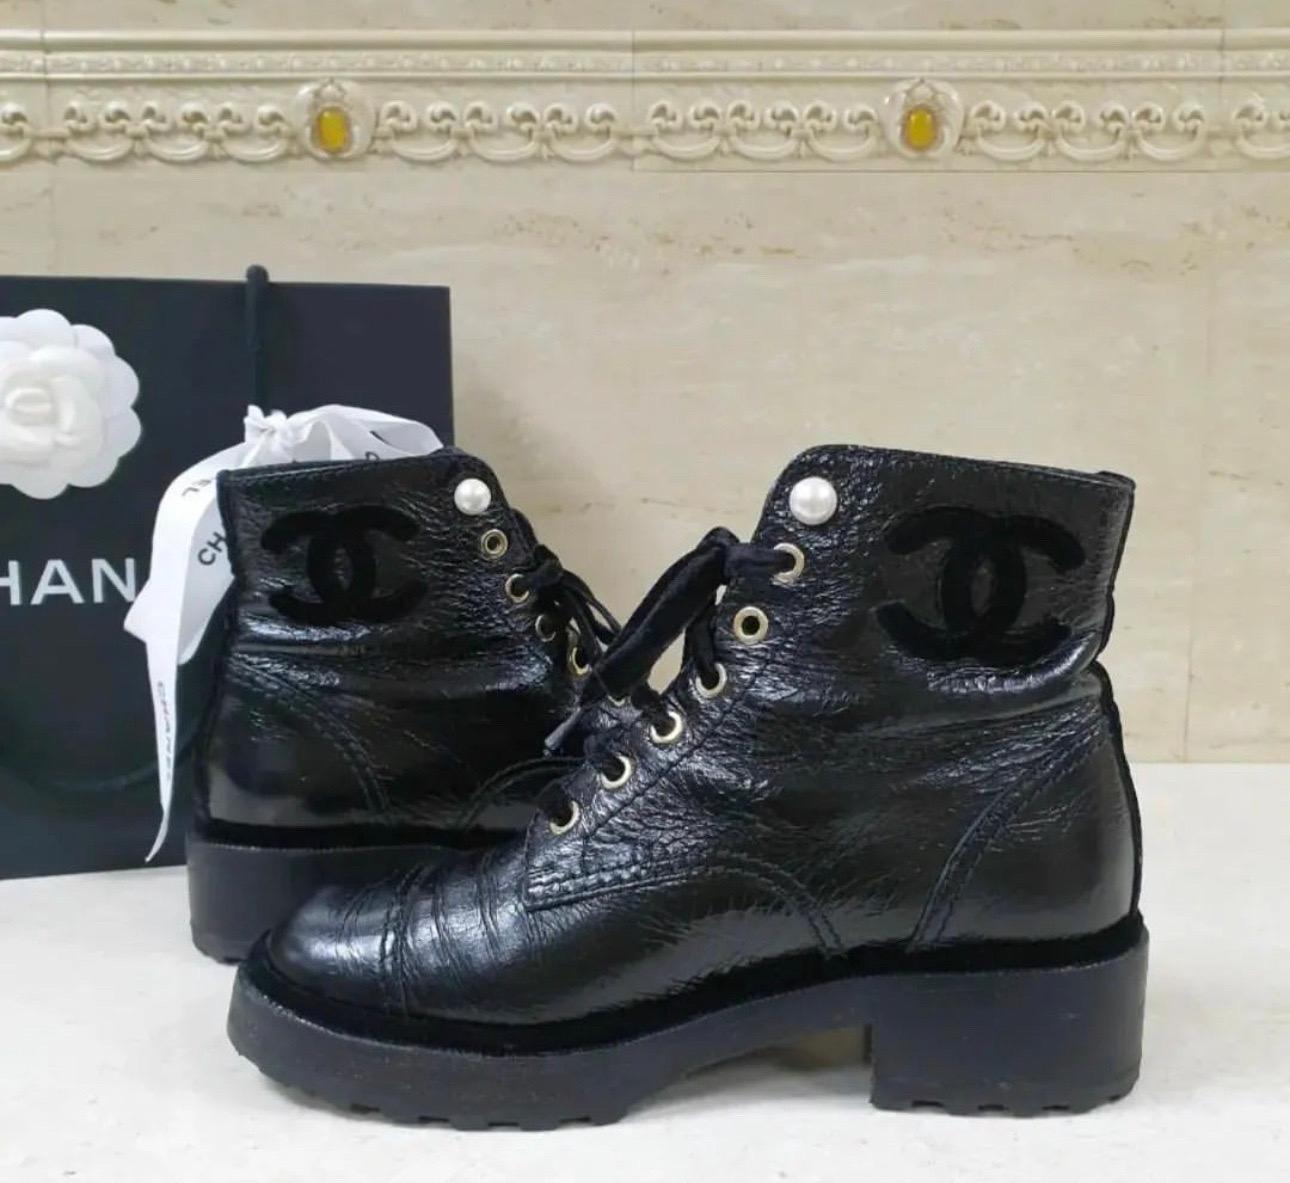 Chanel black crackled calfskin leather. 
Pearl detail and velvet laces. 
Heeled boot. 
Lace up. 
Colour: black.
Sz.37
Good condition. Signs of wear seen on pics.
No box. No dust bag.